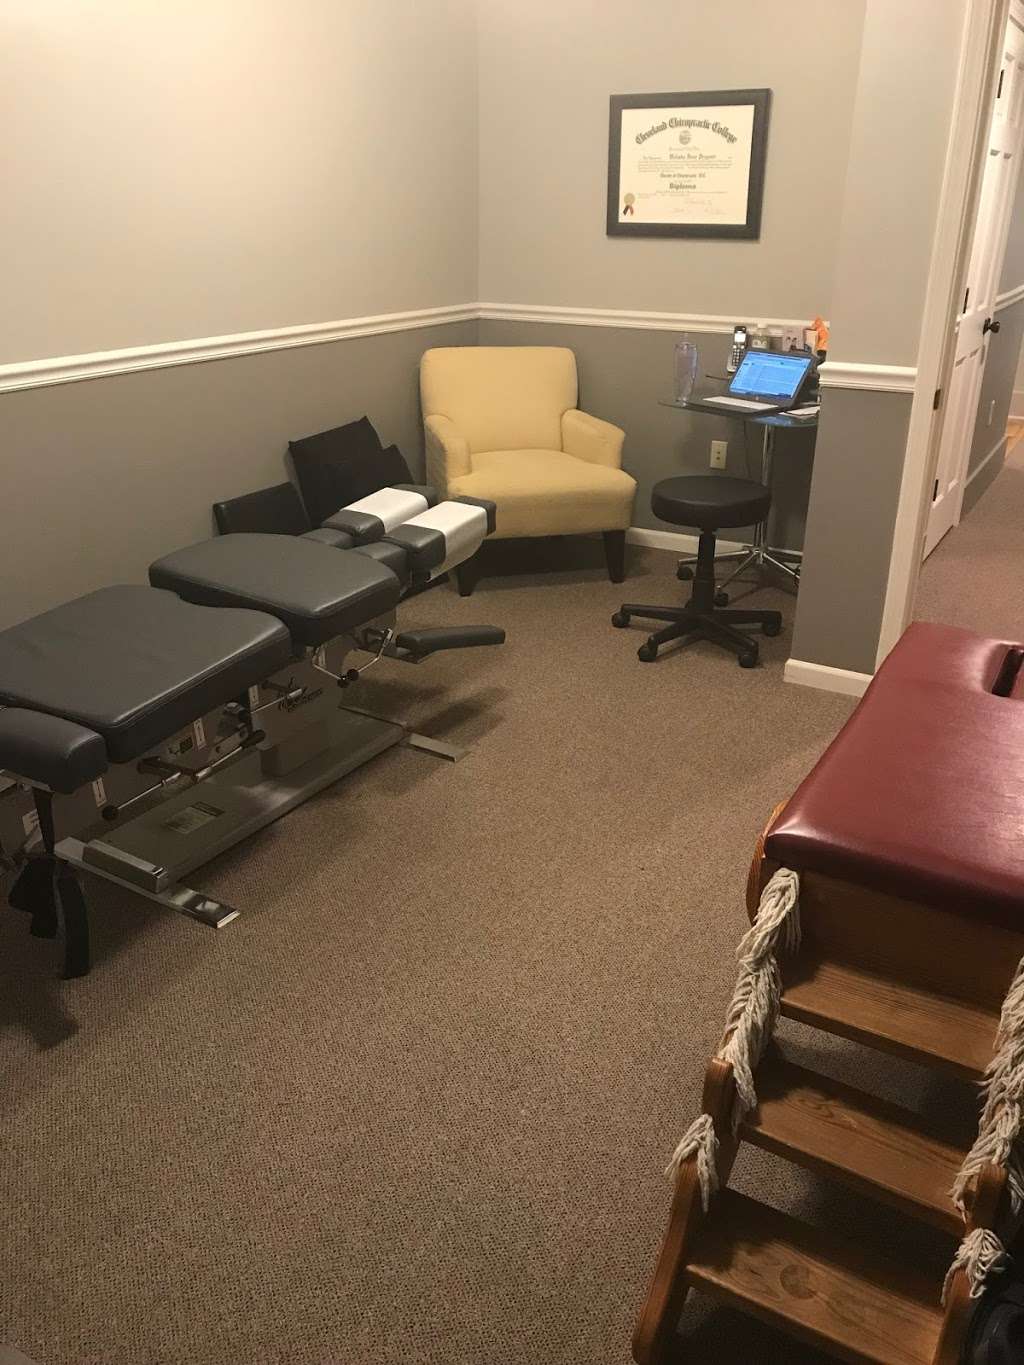 Trusted Care Chiropractic | 310 Commercial St, Atchison, KS 66002, USA | Phone: (913) 367-5103